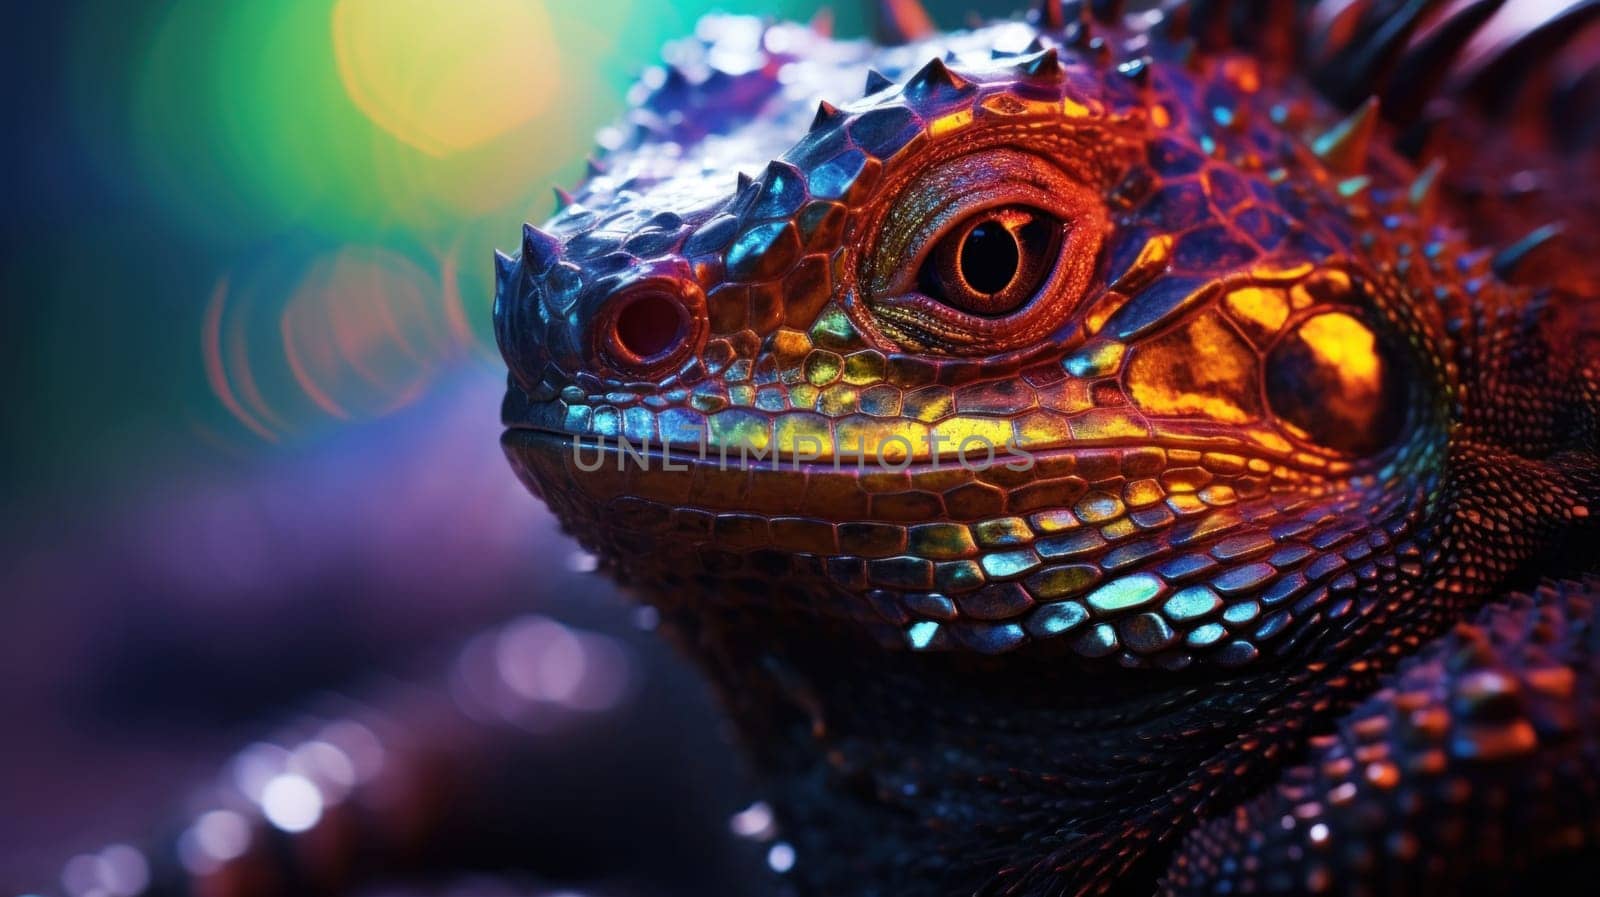 A close up of a colorful lizard with spikes on its head